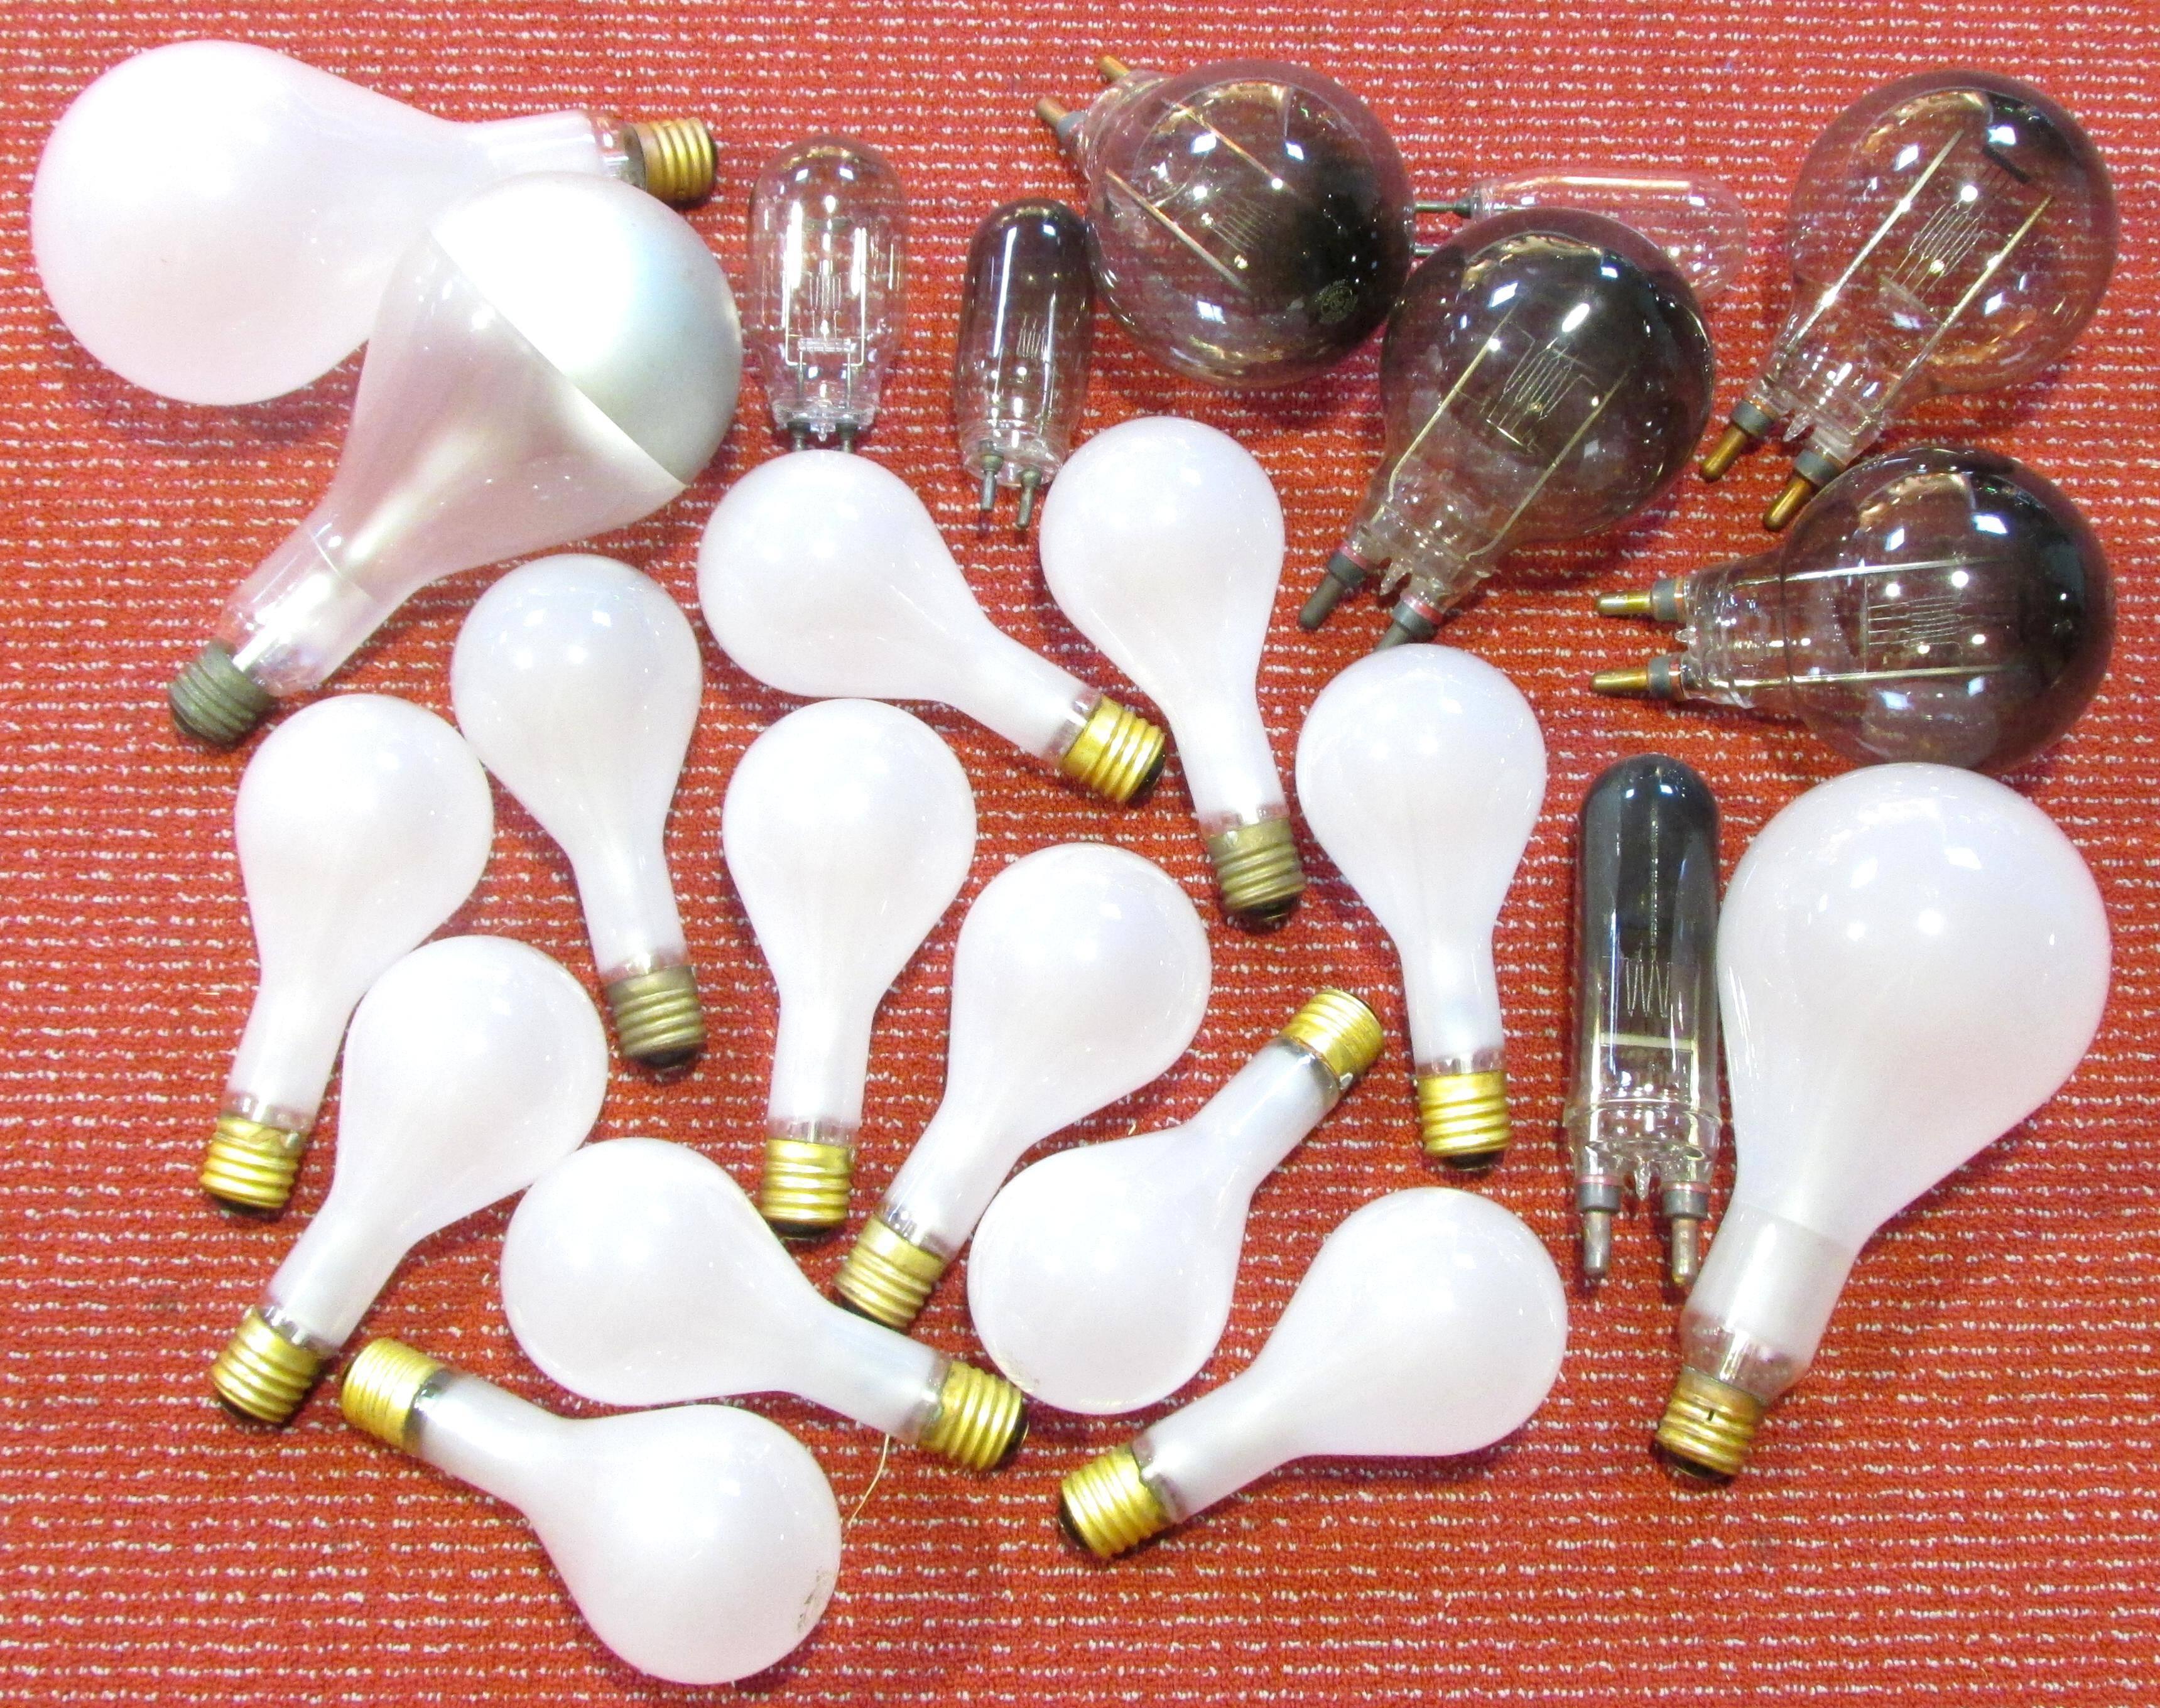 Collection of 22 vintage light blubs sizes vary (bowl is not included).